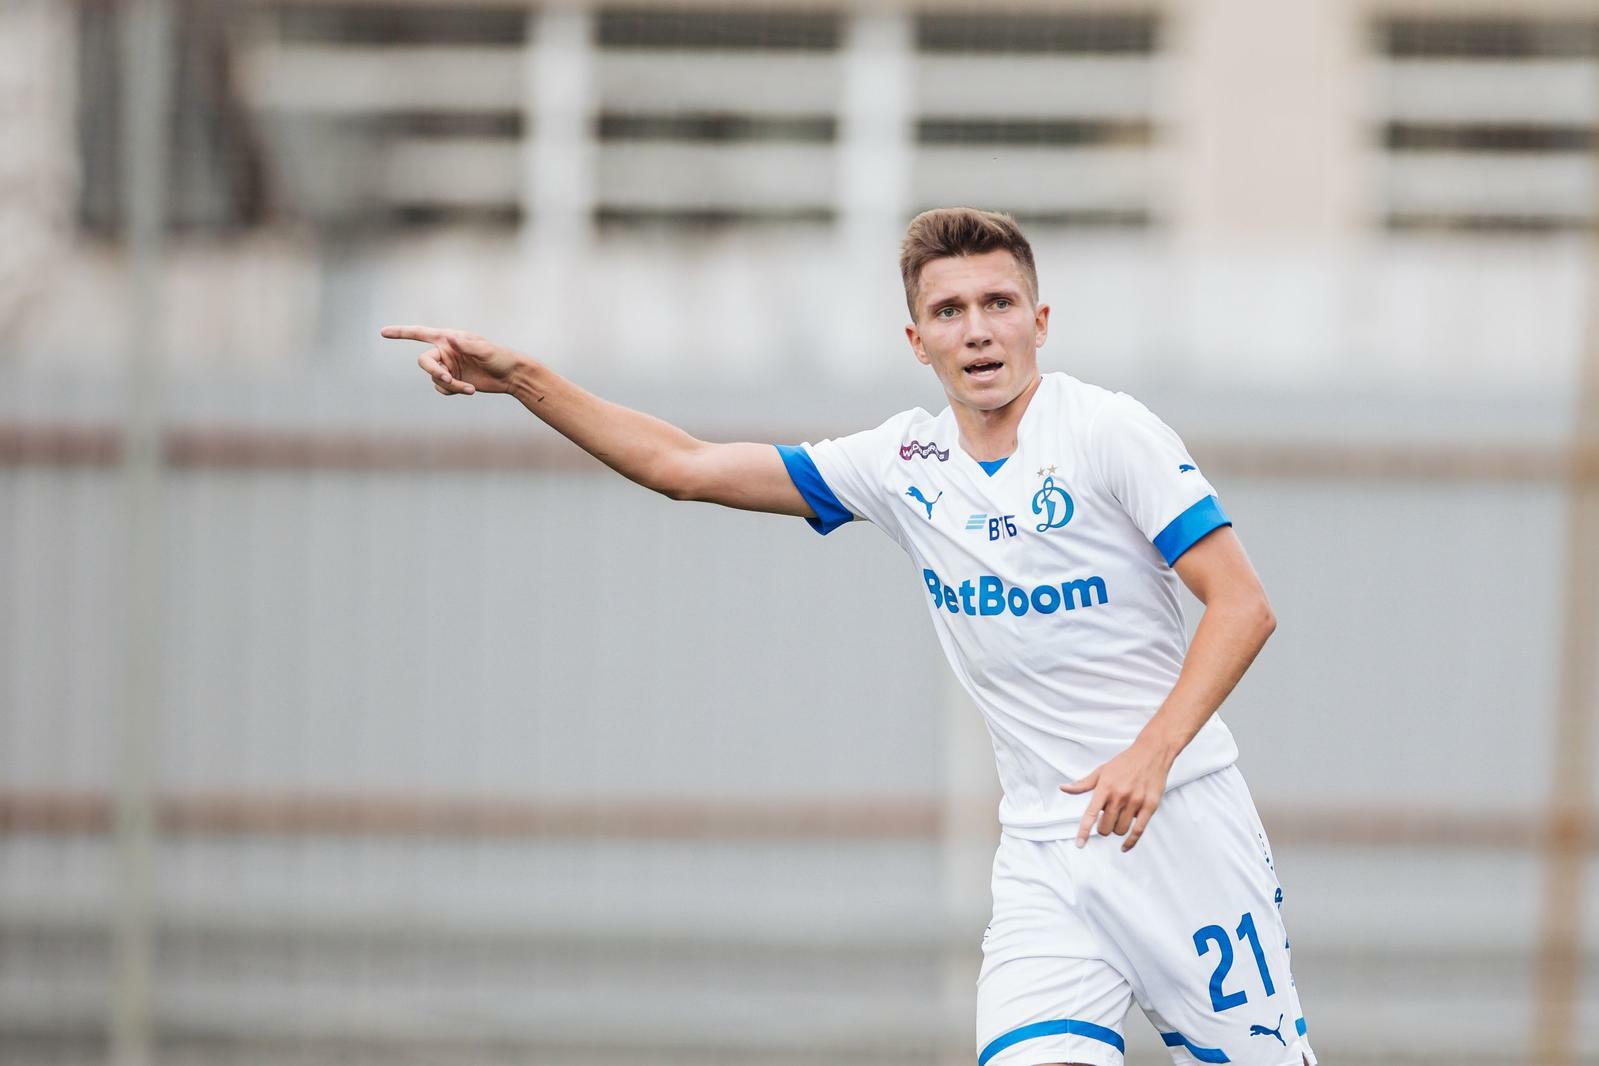 Dynamo Moscow news | Ivan Zazvonkin on loan at Chernomorets. Dynamo official website.